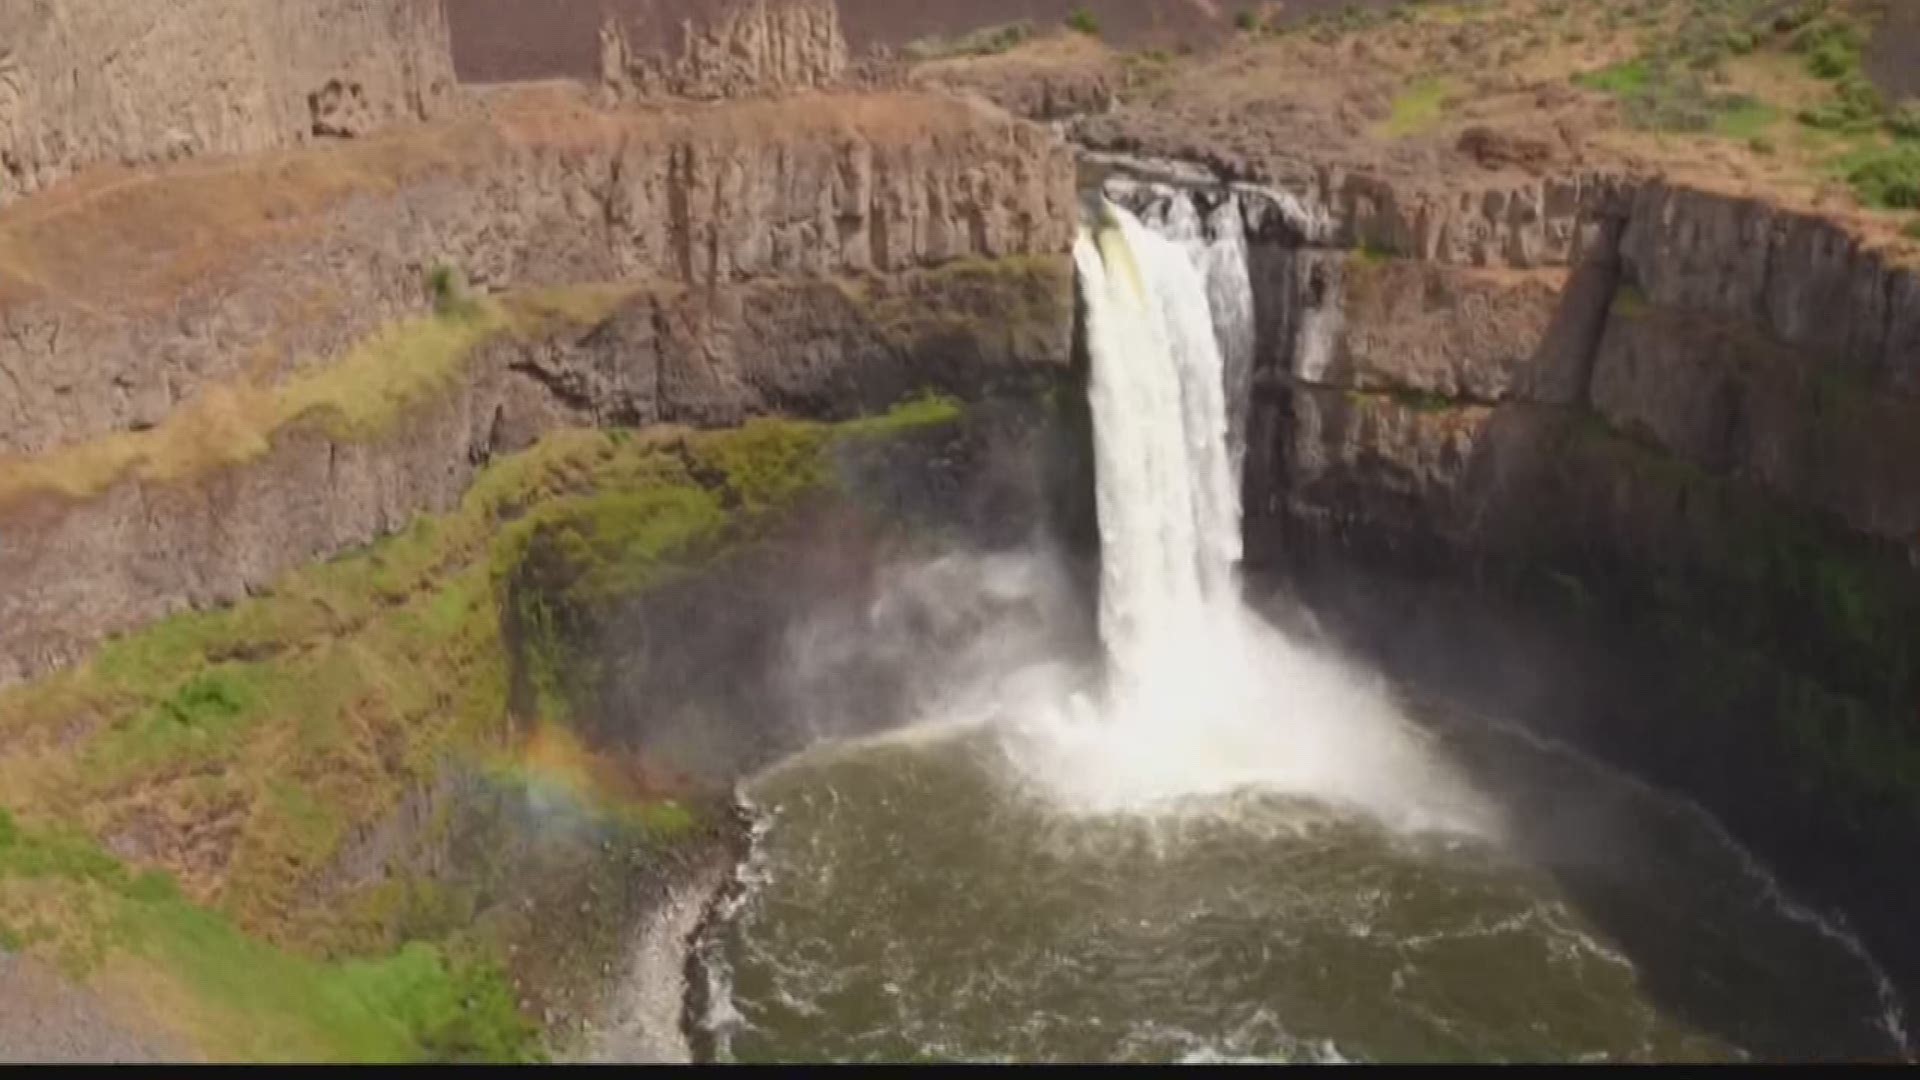 KREM 2's Taylor Viydo reports on the death of a Spokane man after falling from a cliff at the Palouse Falls State Park. (5-30-17)